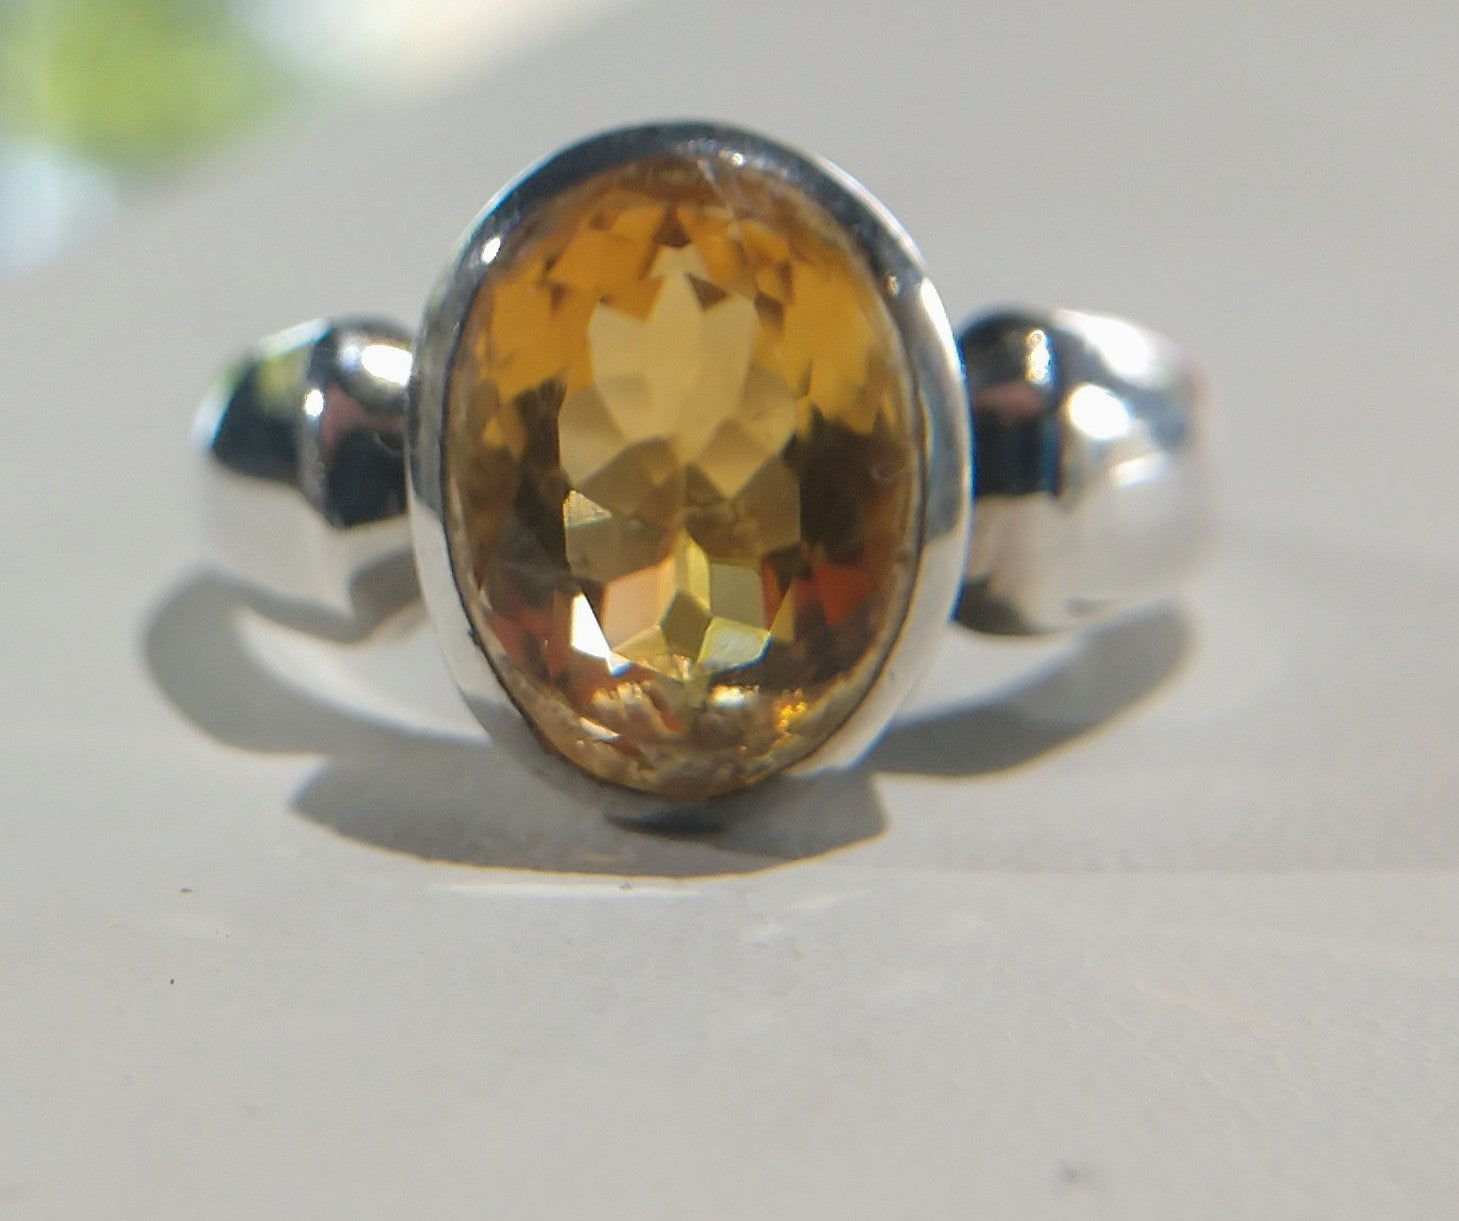 Faceted Natural Citrine Ring